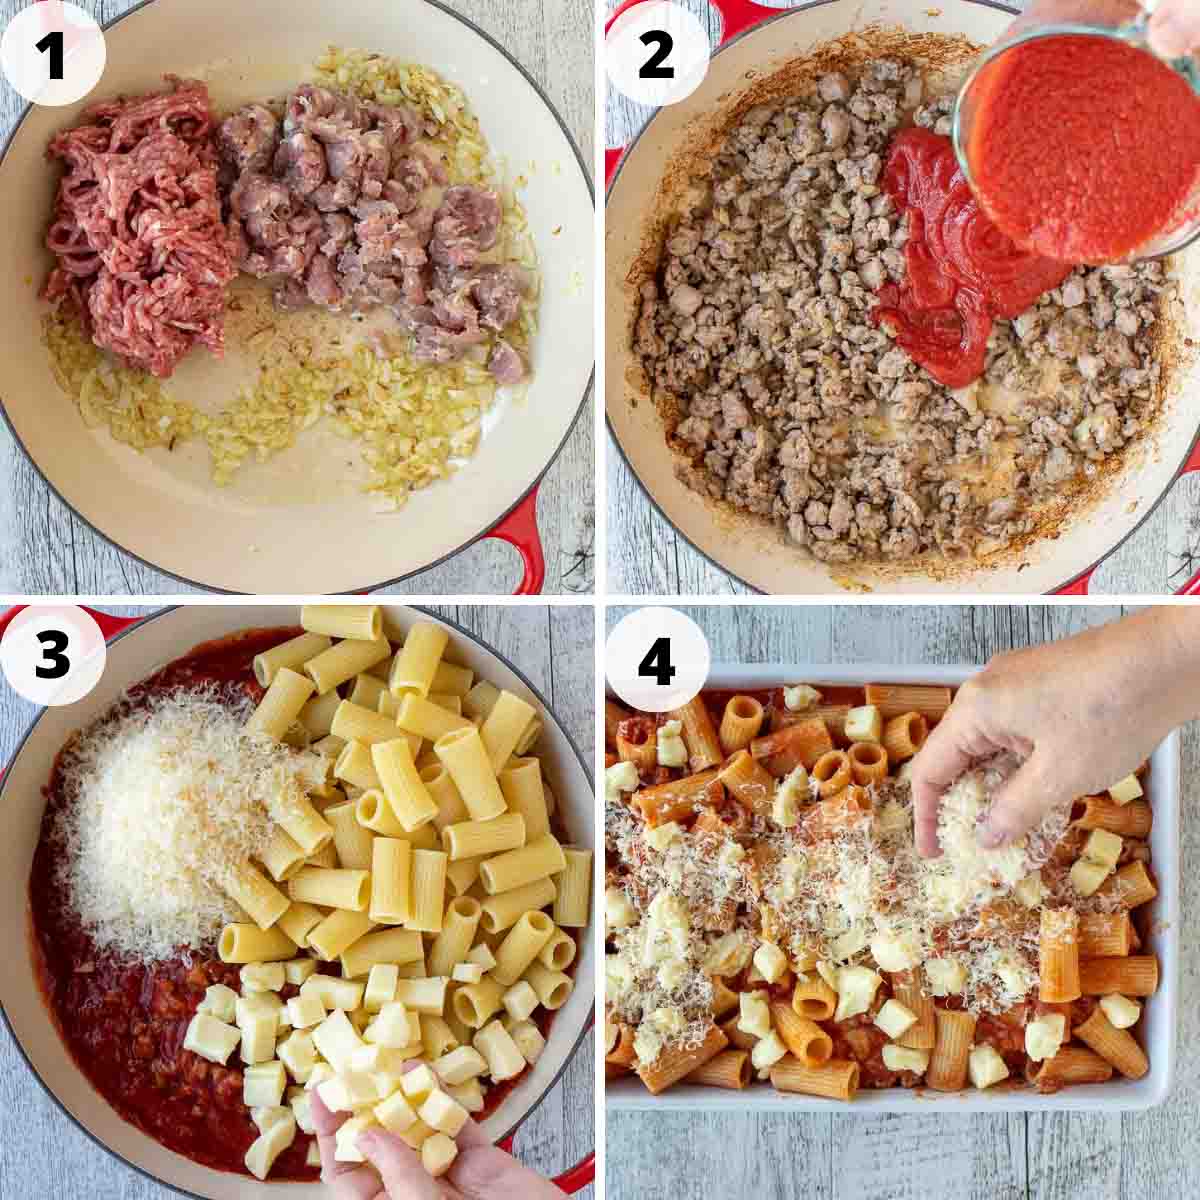 Four step process showing how to make this baked pasta dishe.